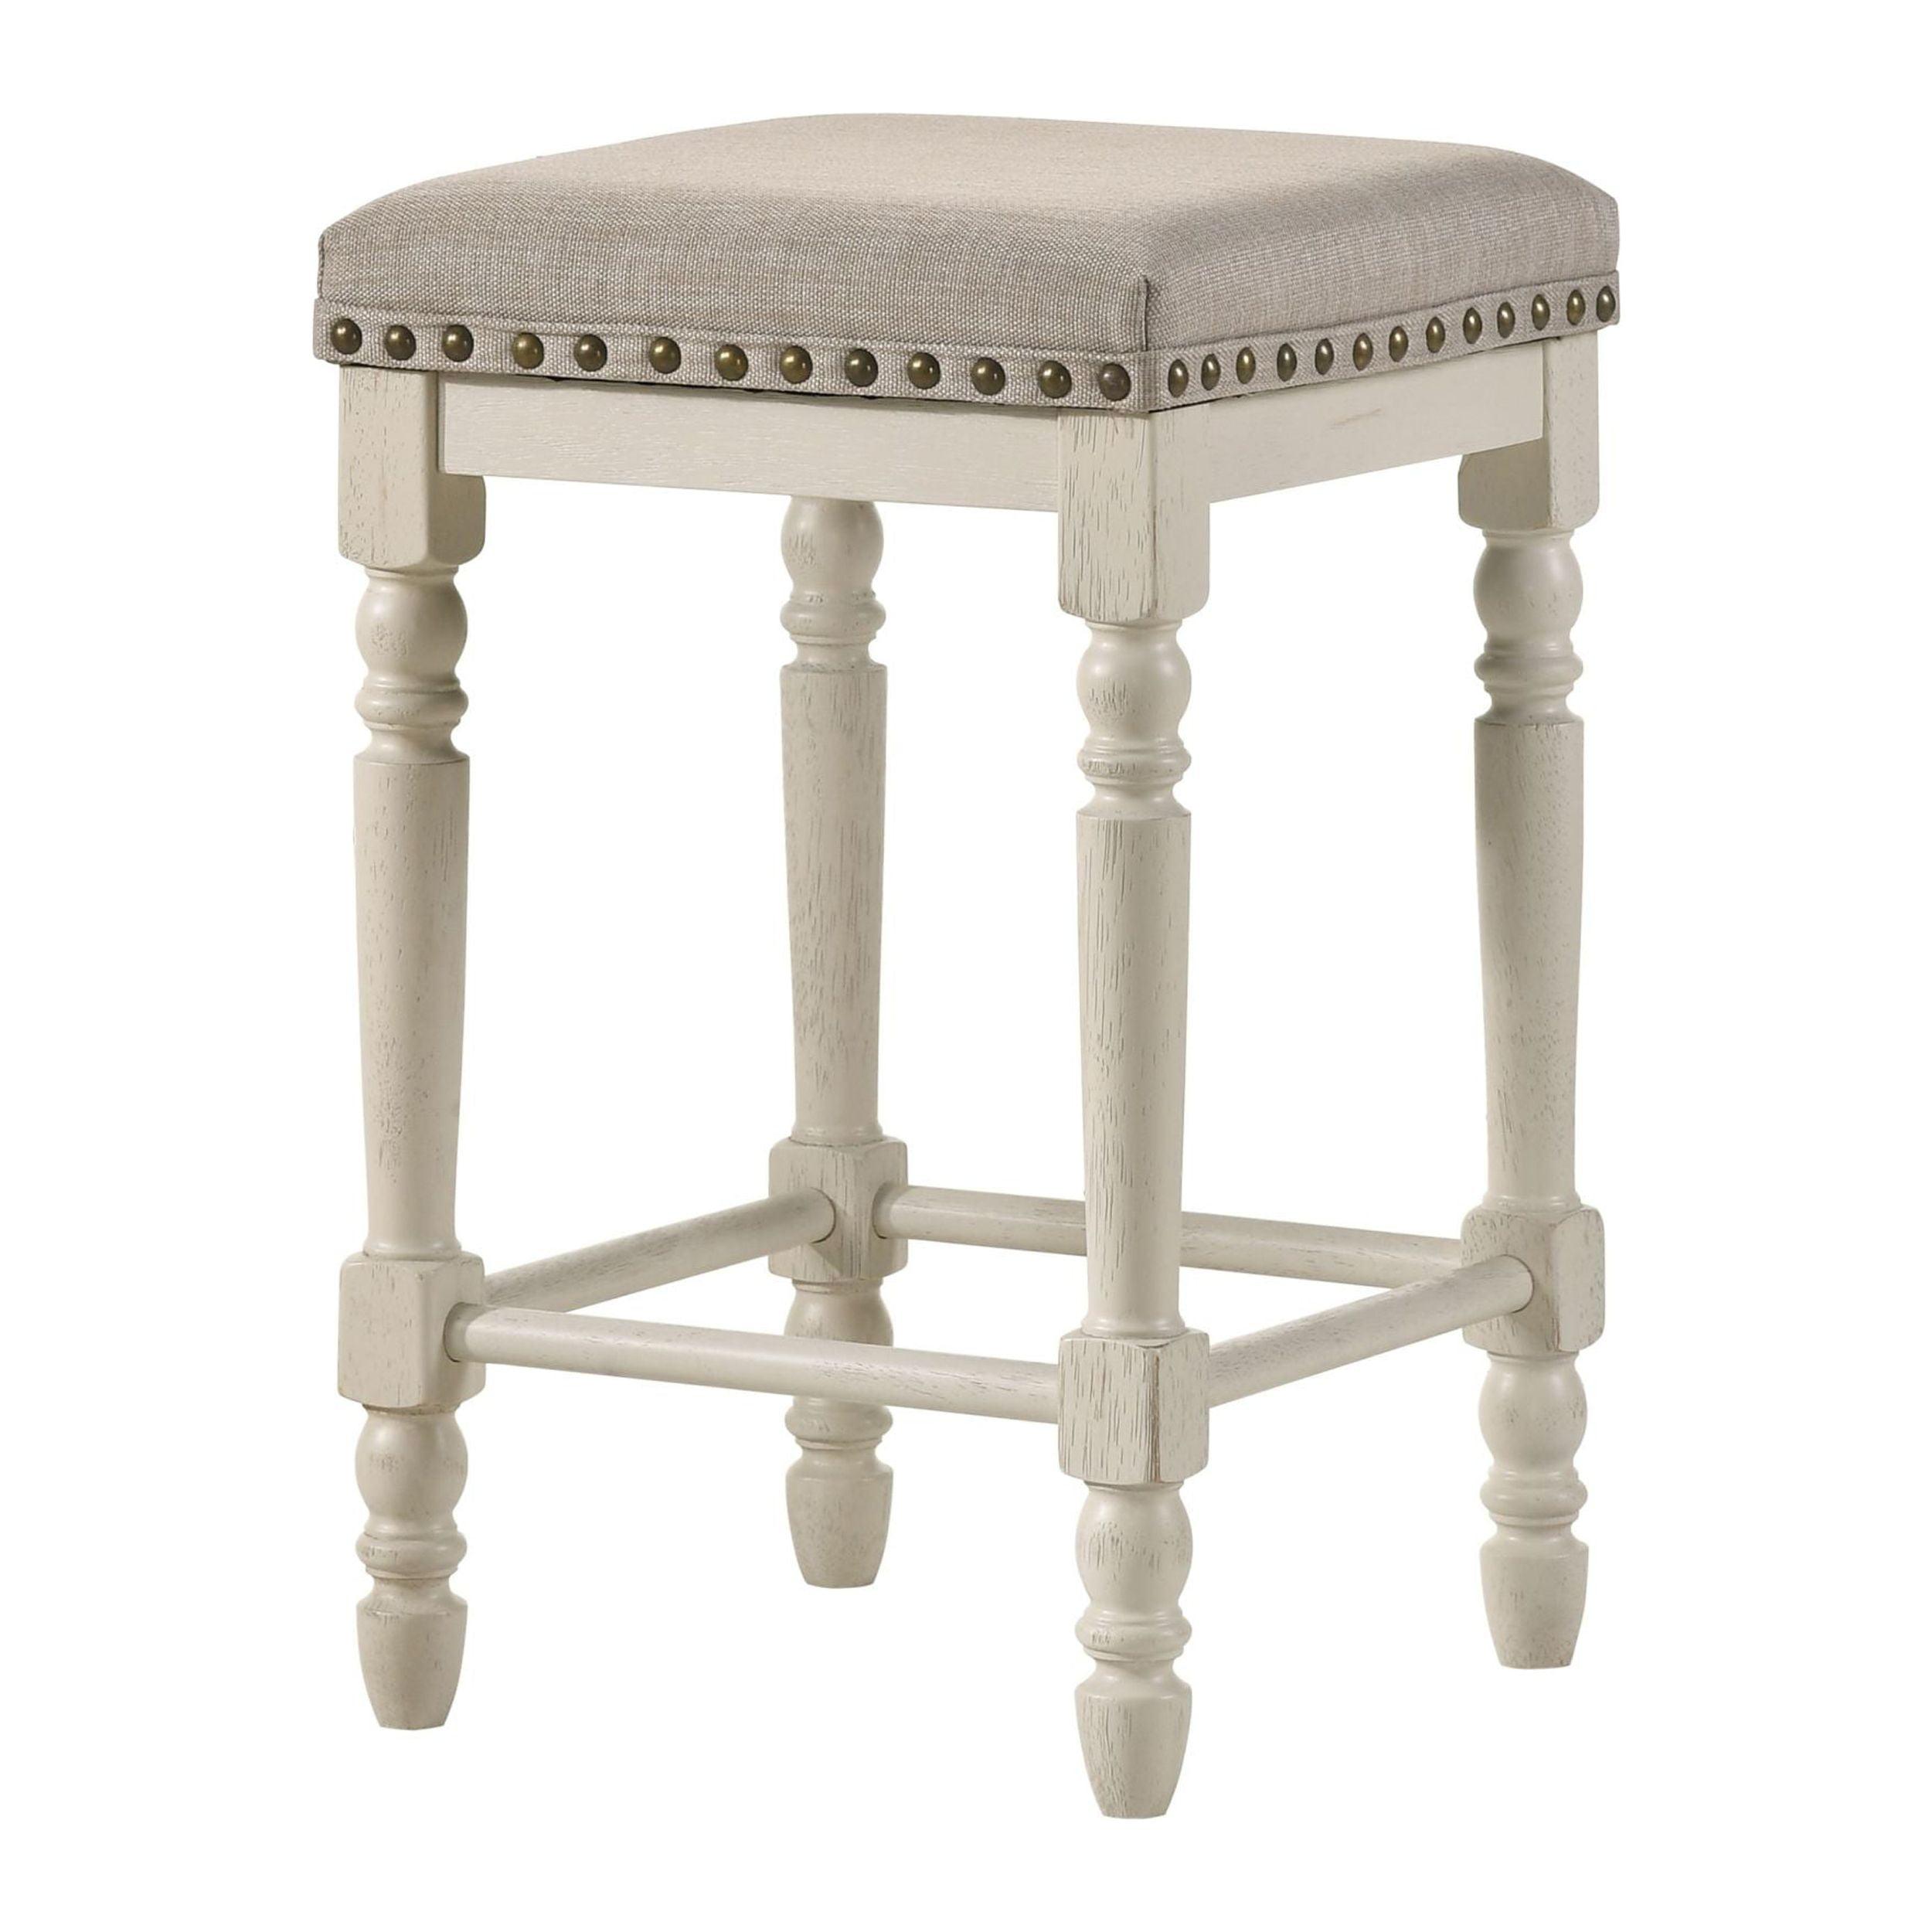 Tasnim Antique White and Oak Backless Counter Height Stool